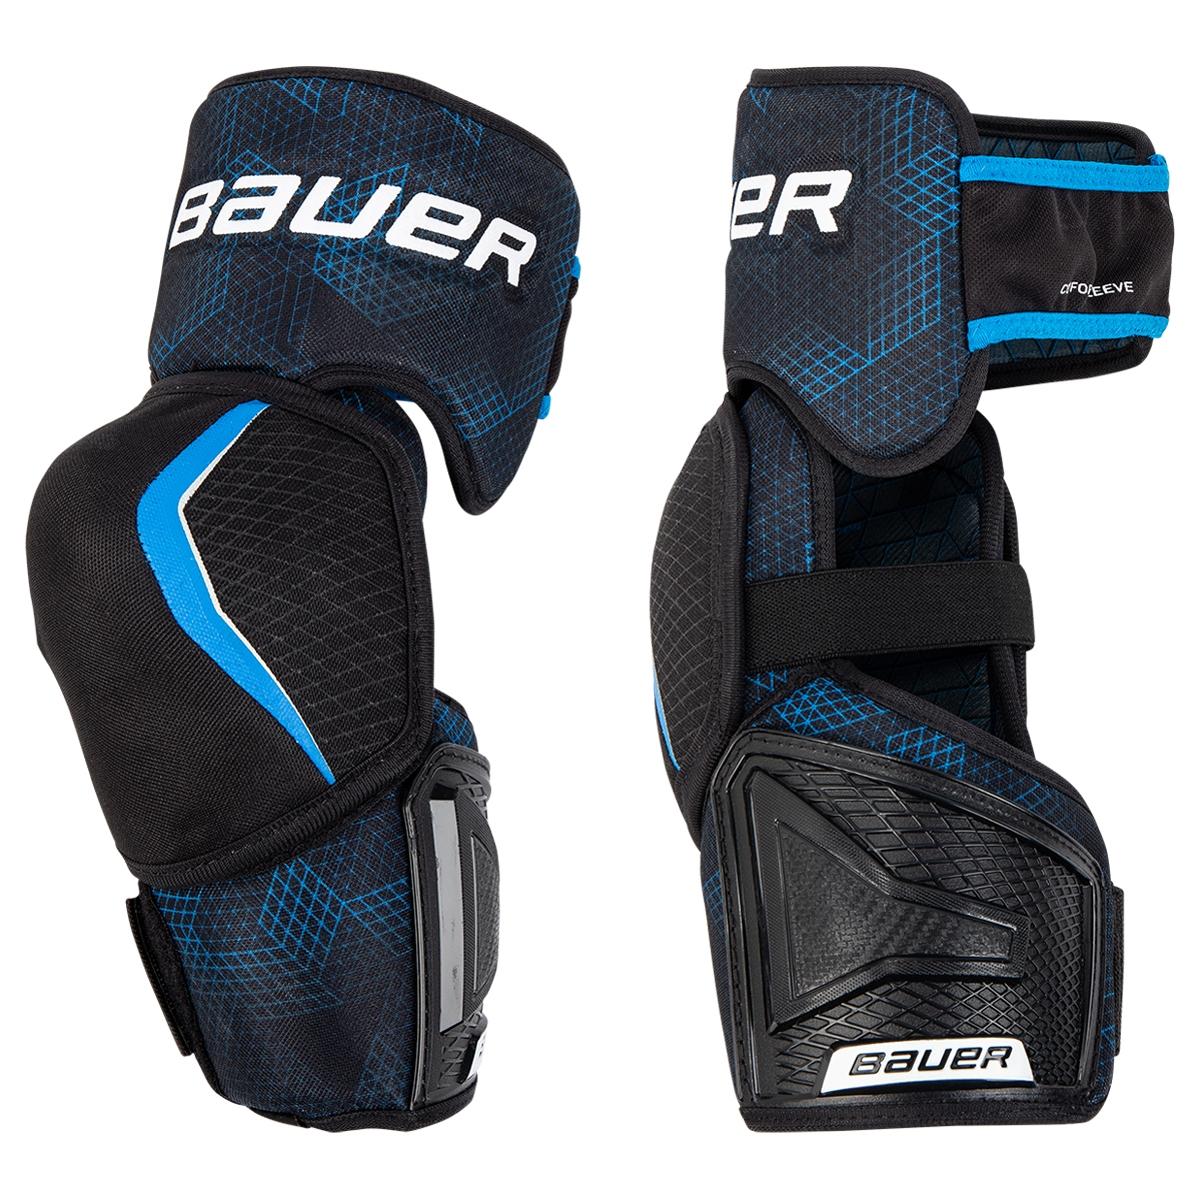 Bauer X Int. Hockey Elbow Padsproduct zoom image #1